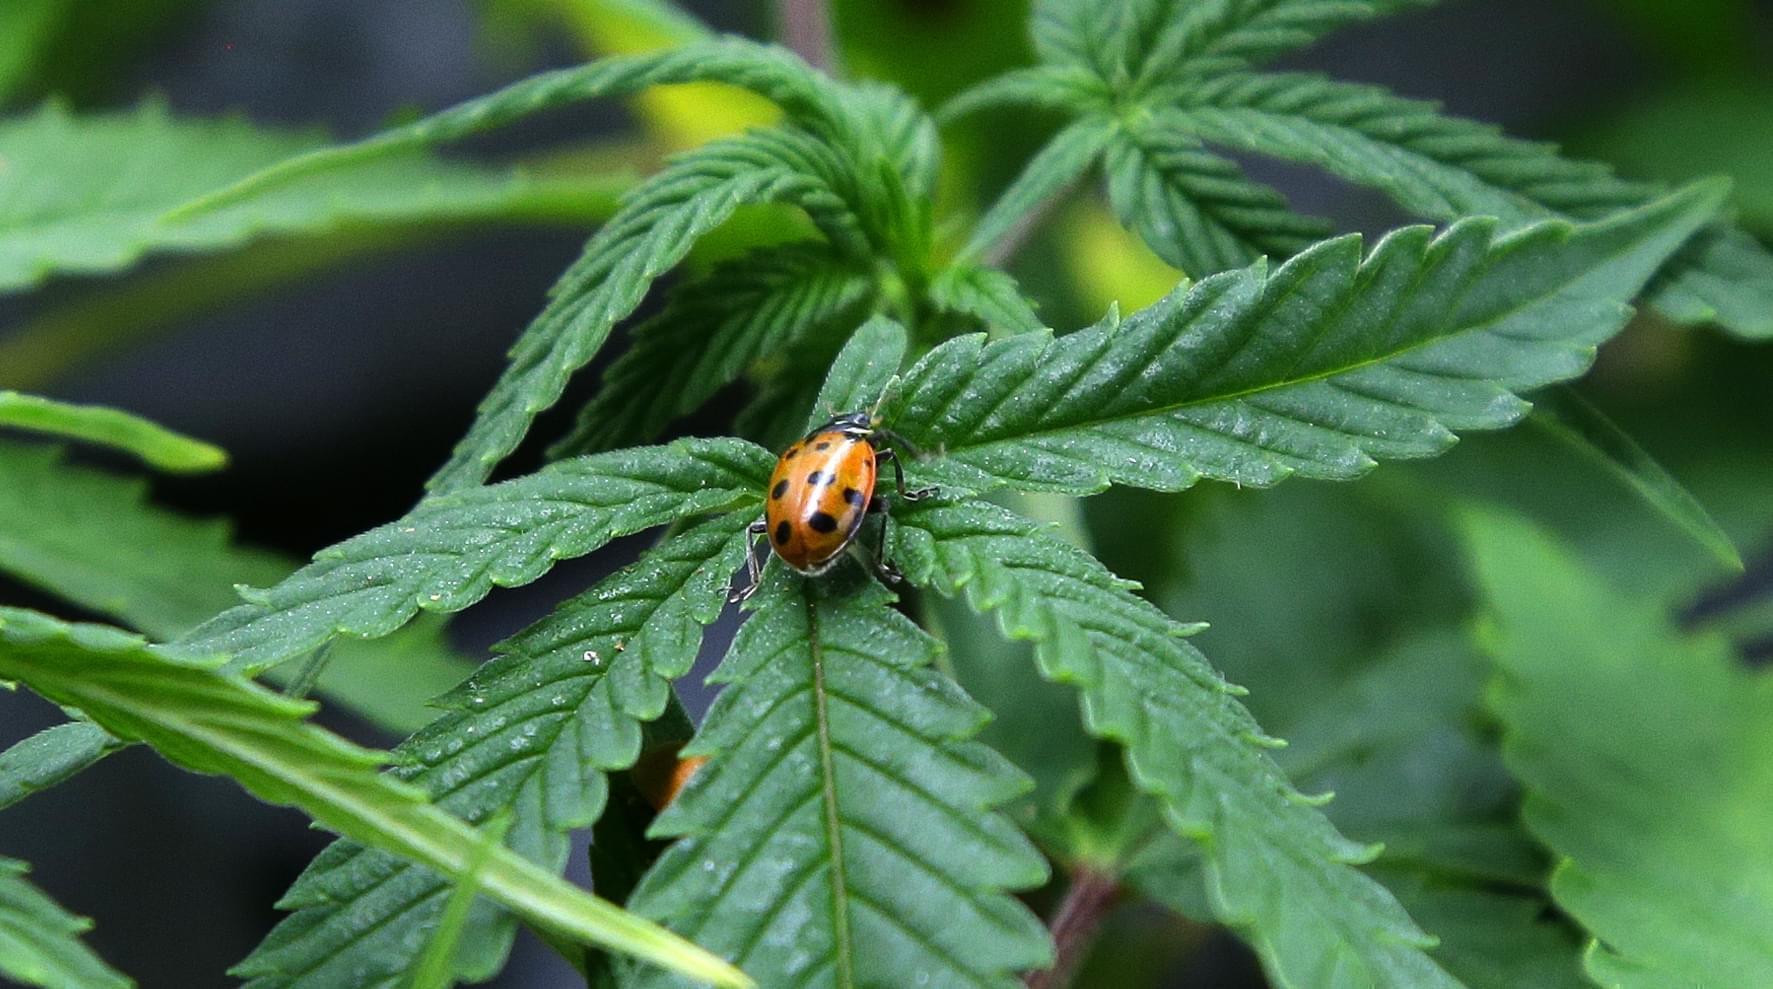 A ladybug crawls on a marijuana plant at Sea of Green Farms, a recreational pot grower in Seattle.